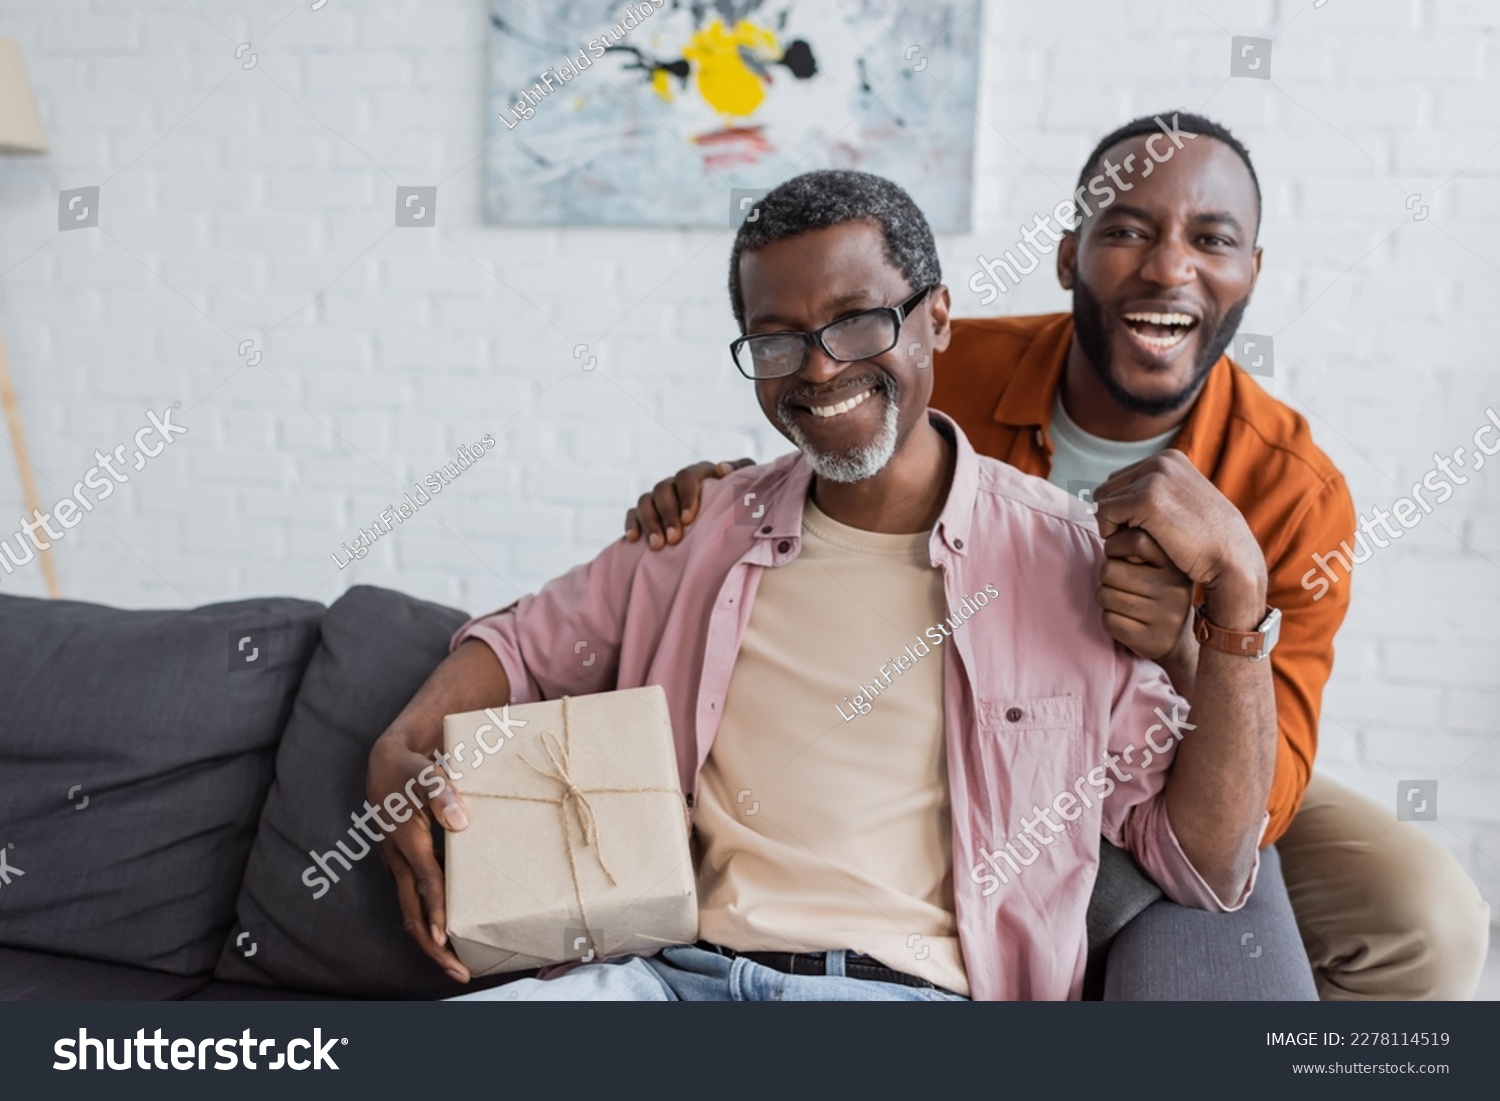 Cheerful african american middle aged man holding gift near son during father day celebration at home #2278114519